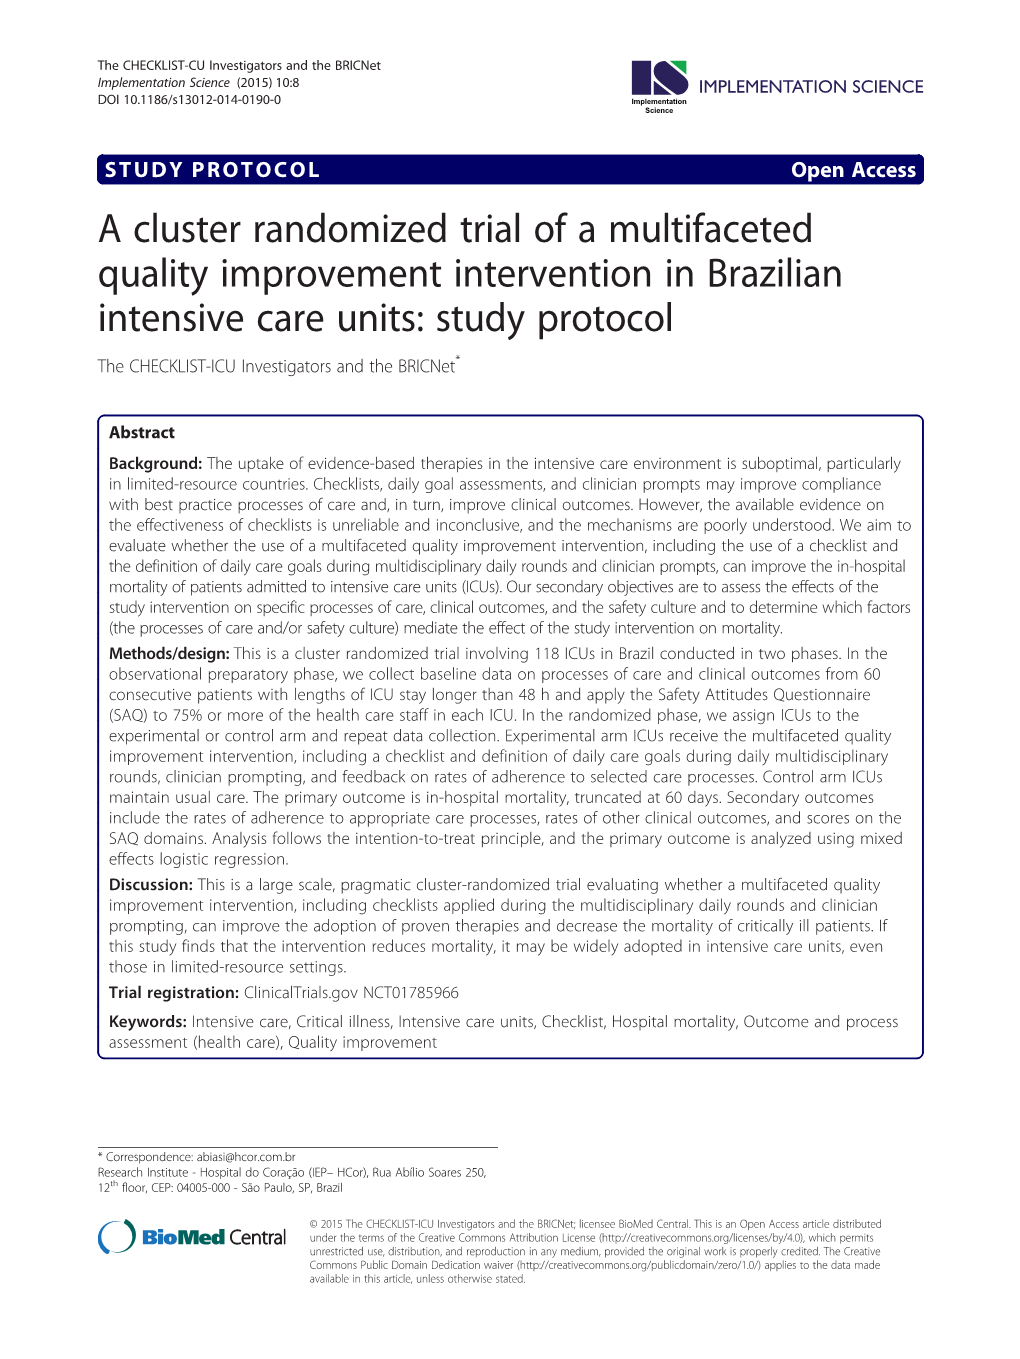 A Cluster Randomized Trial of a Multifaceted Quality Improvement